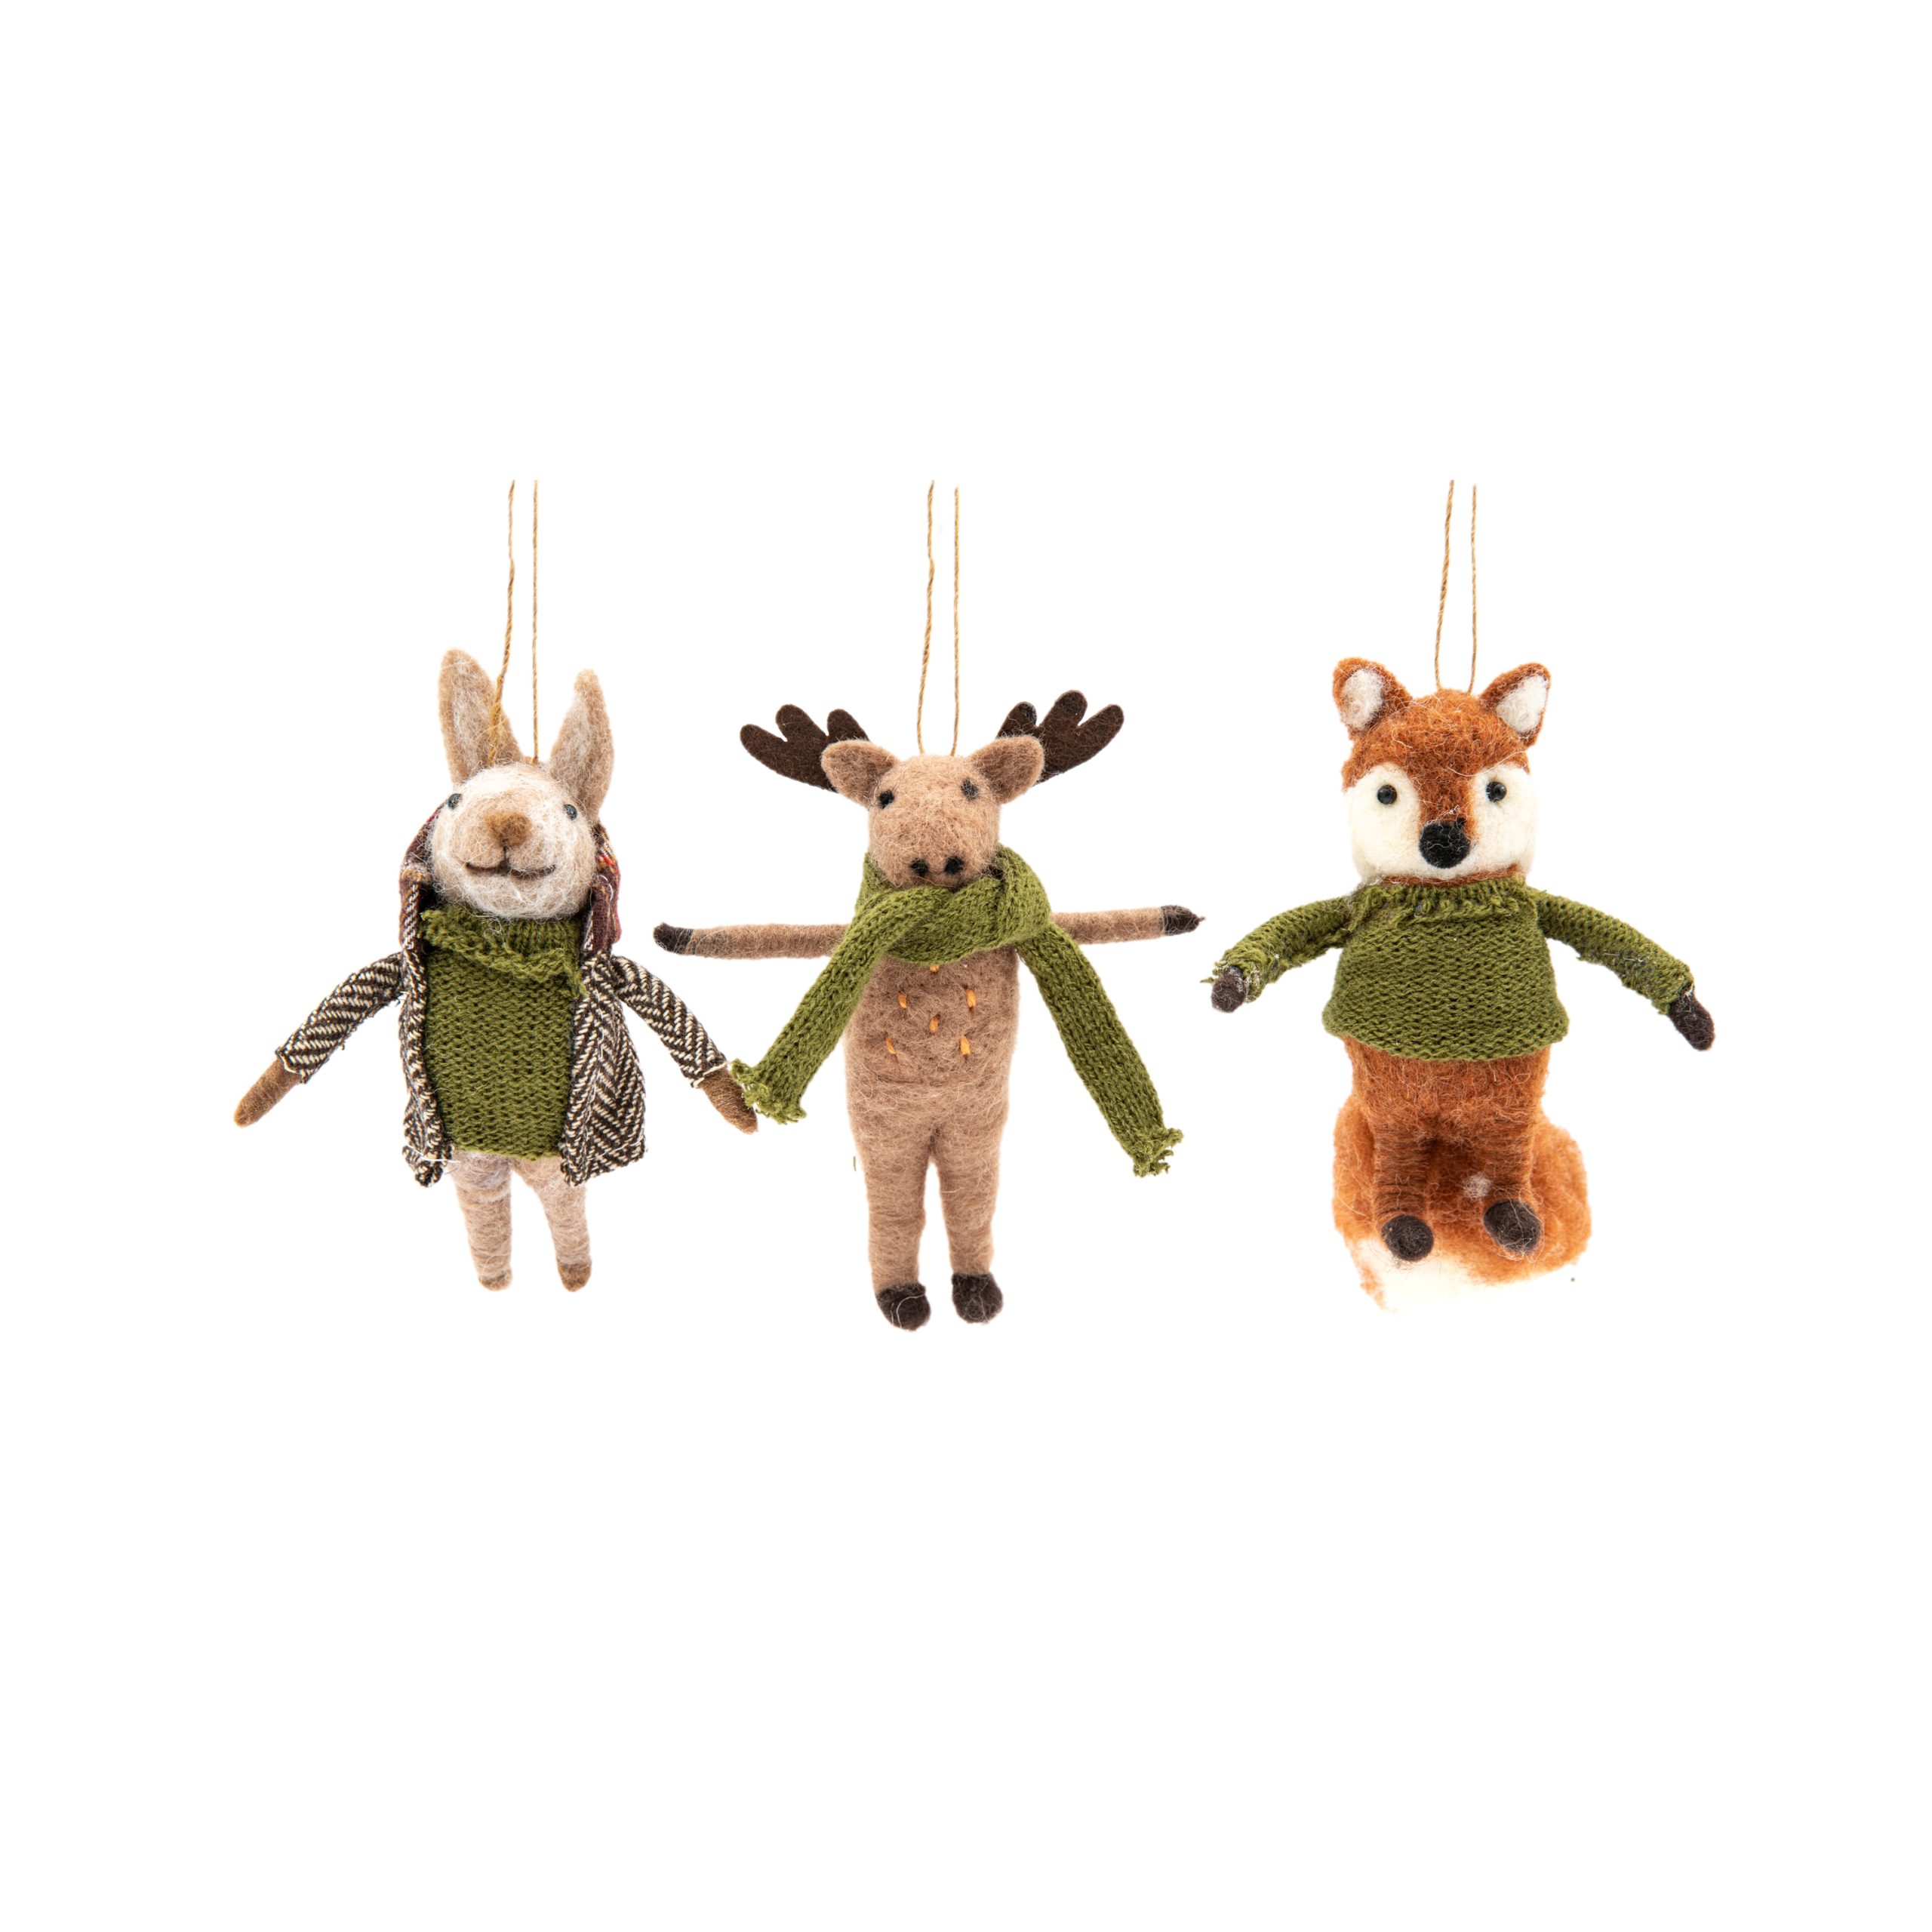 Gallery Direct Woodland Trio Decorations (Set of 3